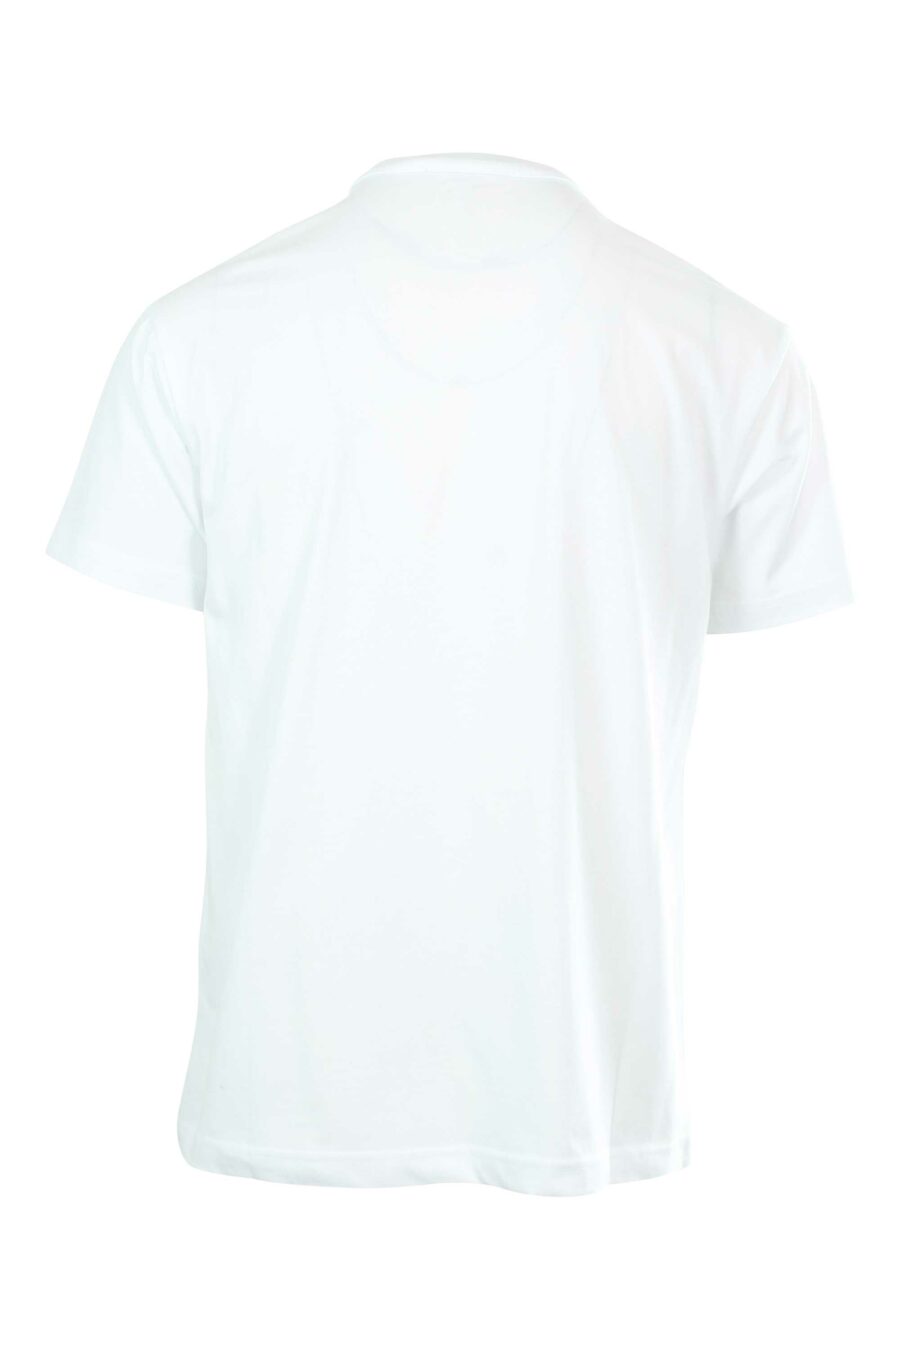 White T-shirt with contrasting maxilogue - 8052019235371 2